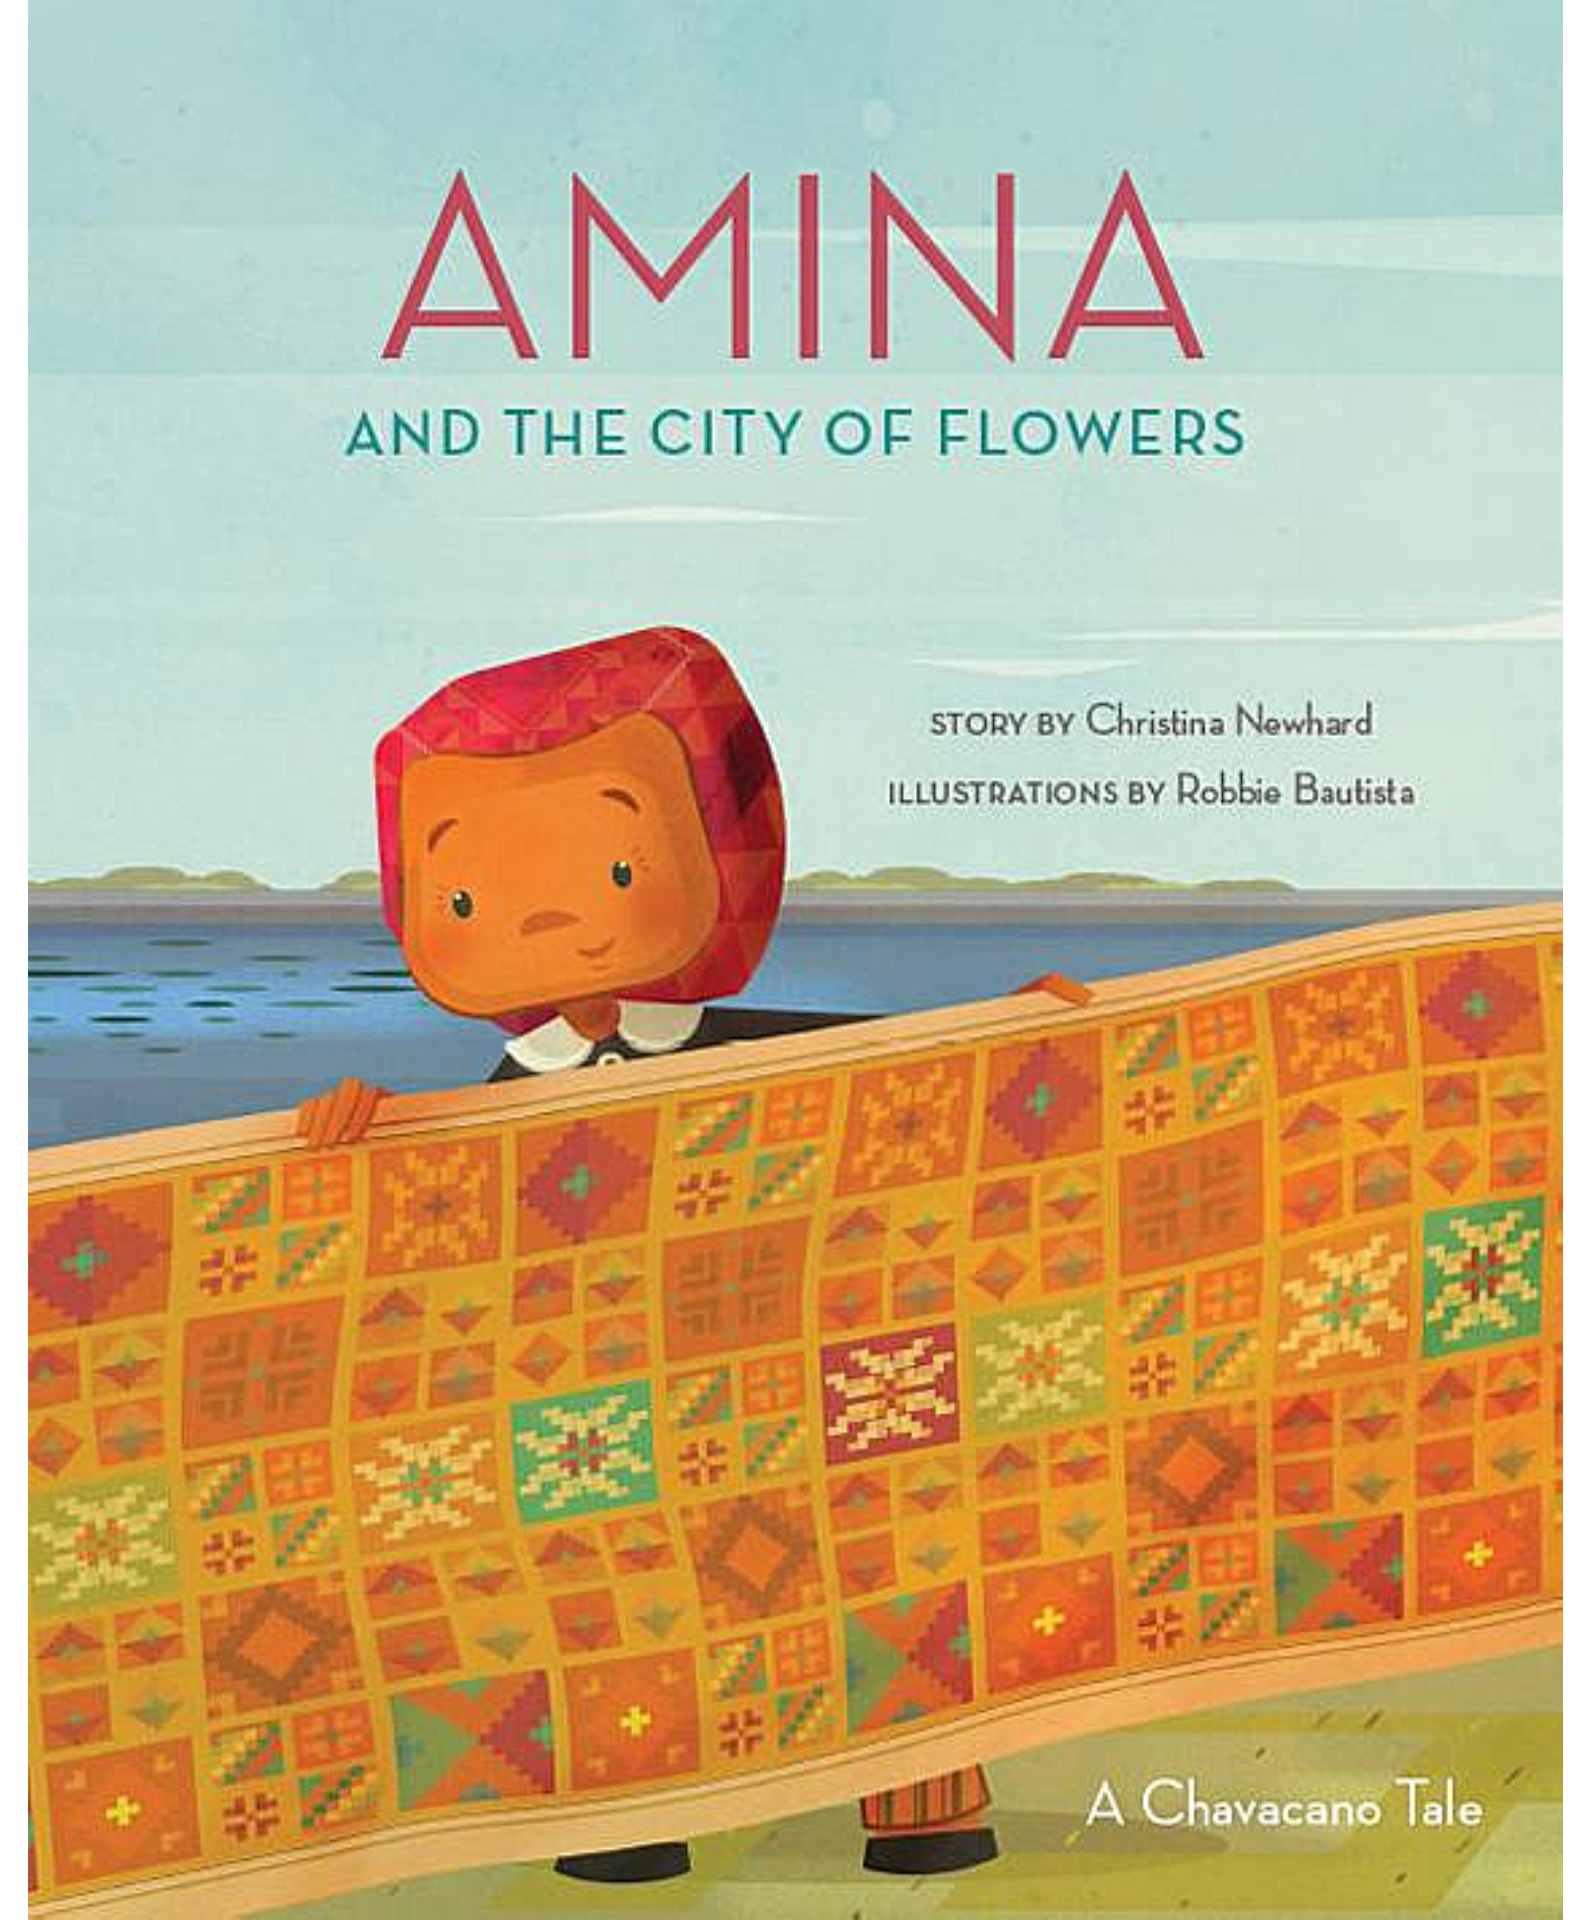 Amina and the City of Flowers